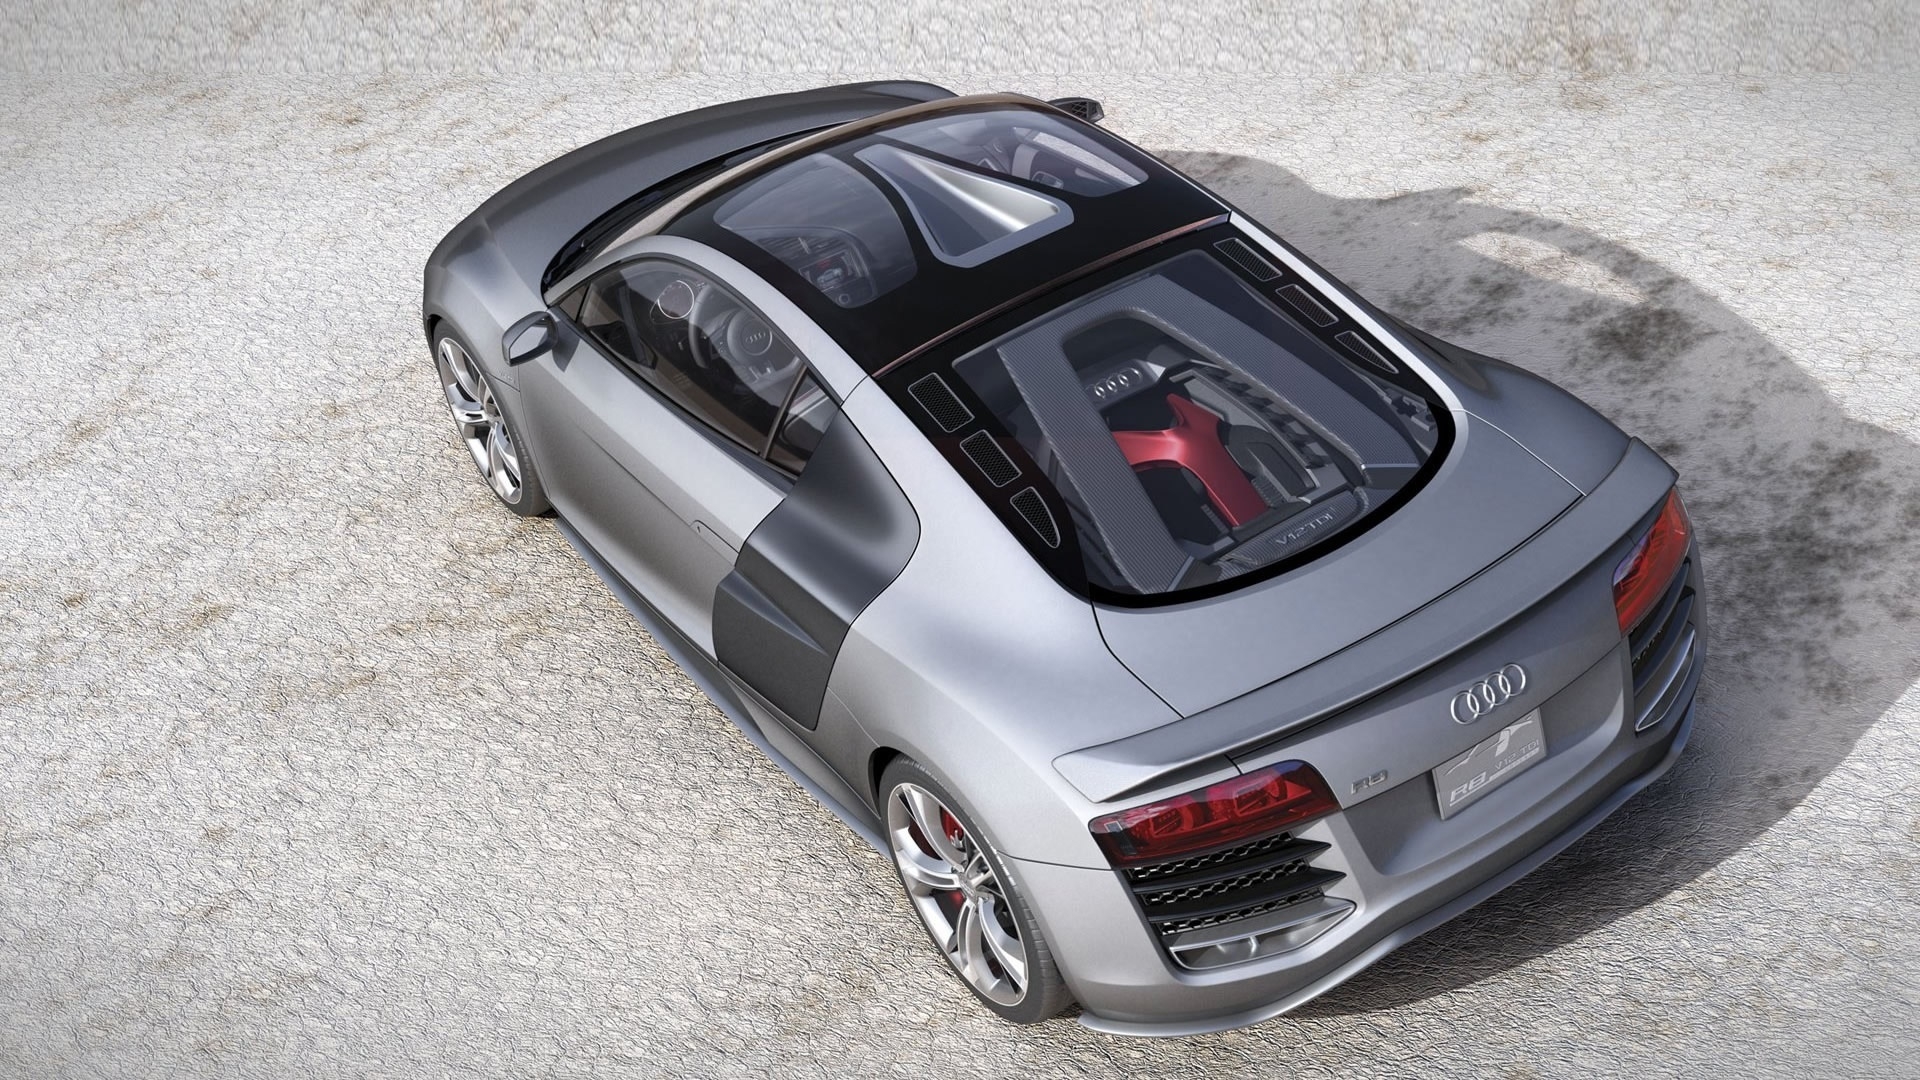 Audi R8 2009 Silver for 1920 x 1080 HDTV 1080p resolution